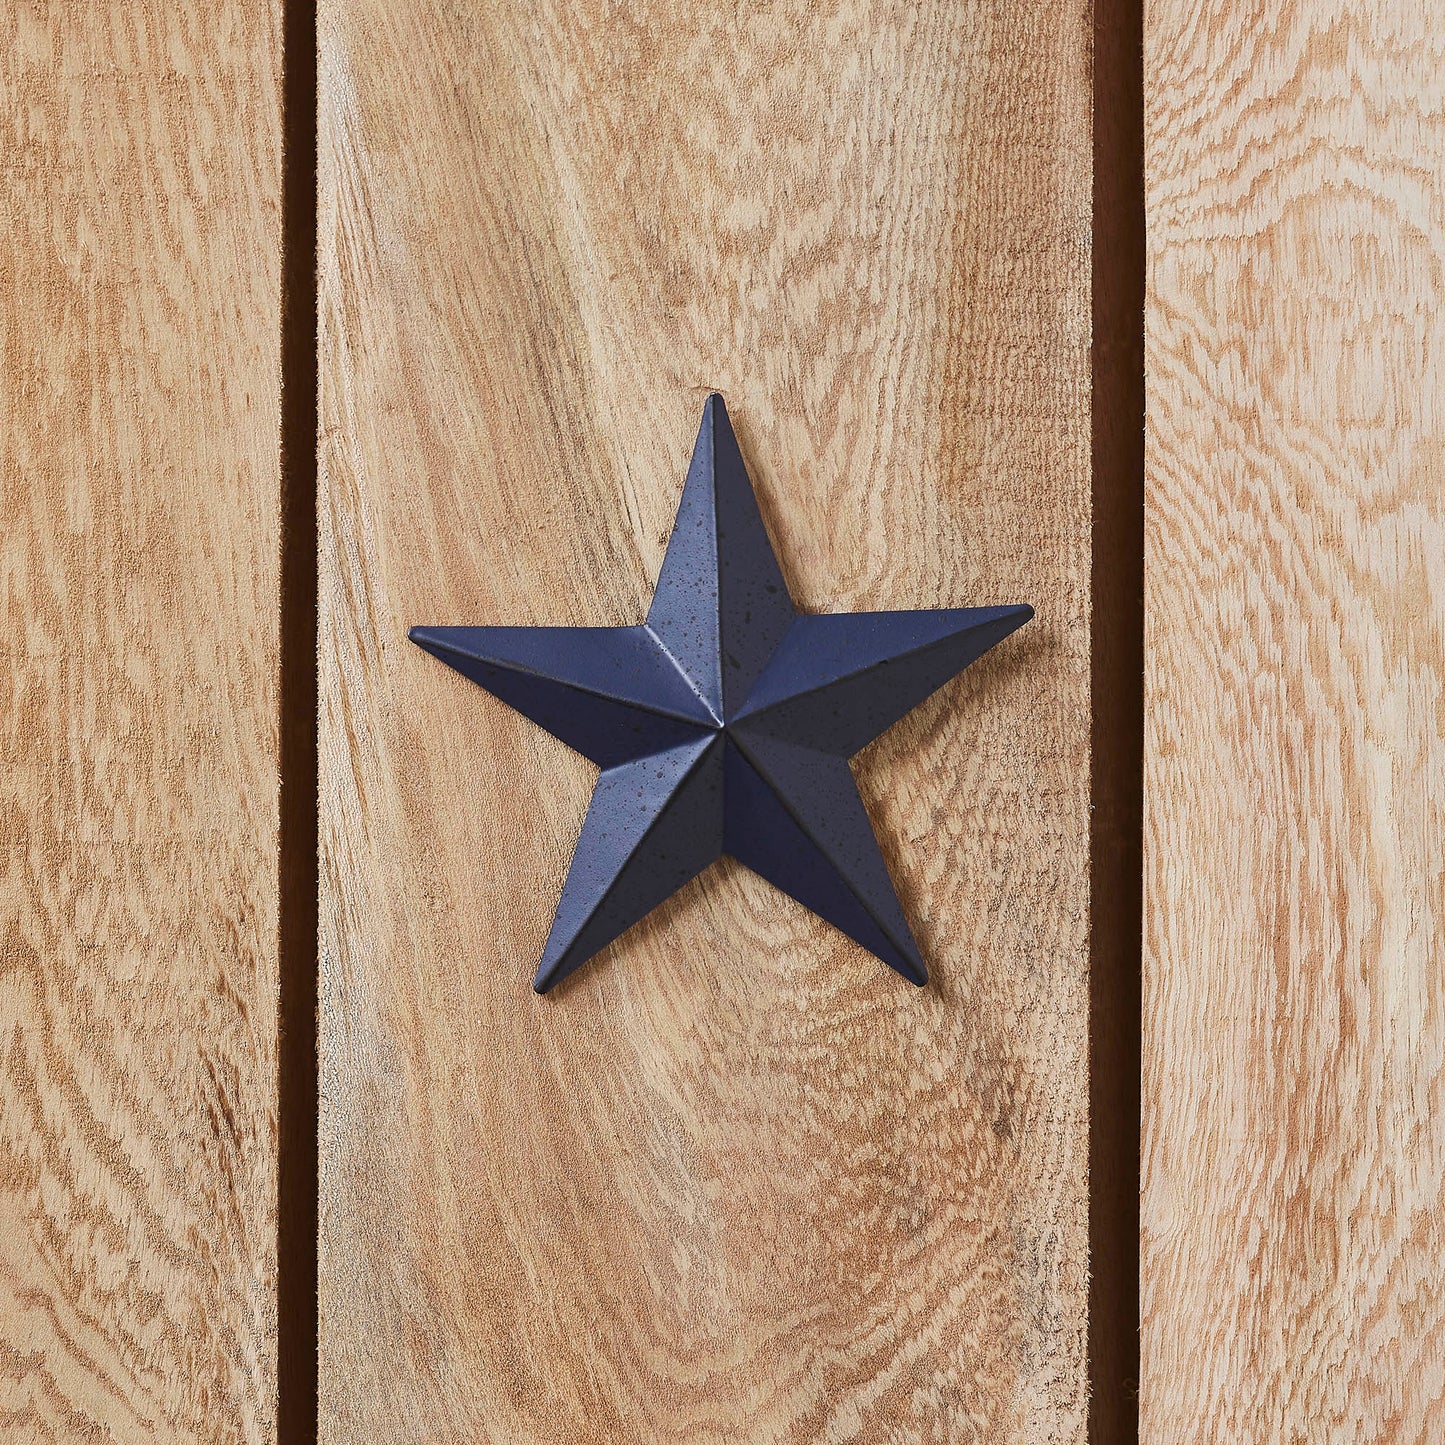 VHC Brands Patriotic Faceted Metal Star Navy Wall Hanging 4x4, Independence Day Decor, American Star Design, Distressed Appearance Metal Wall Hanging,  Star Shape, Country, Navy